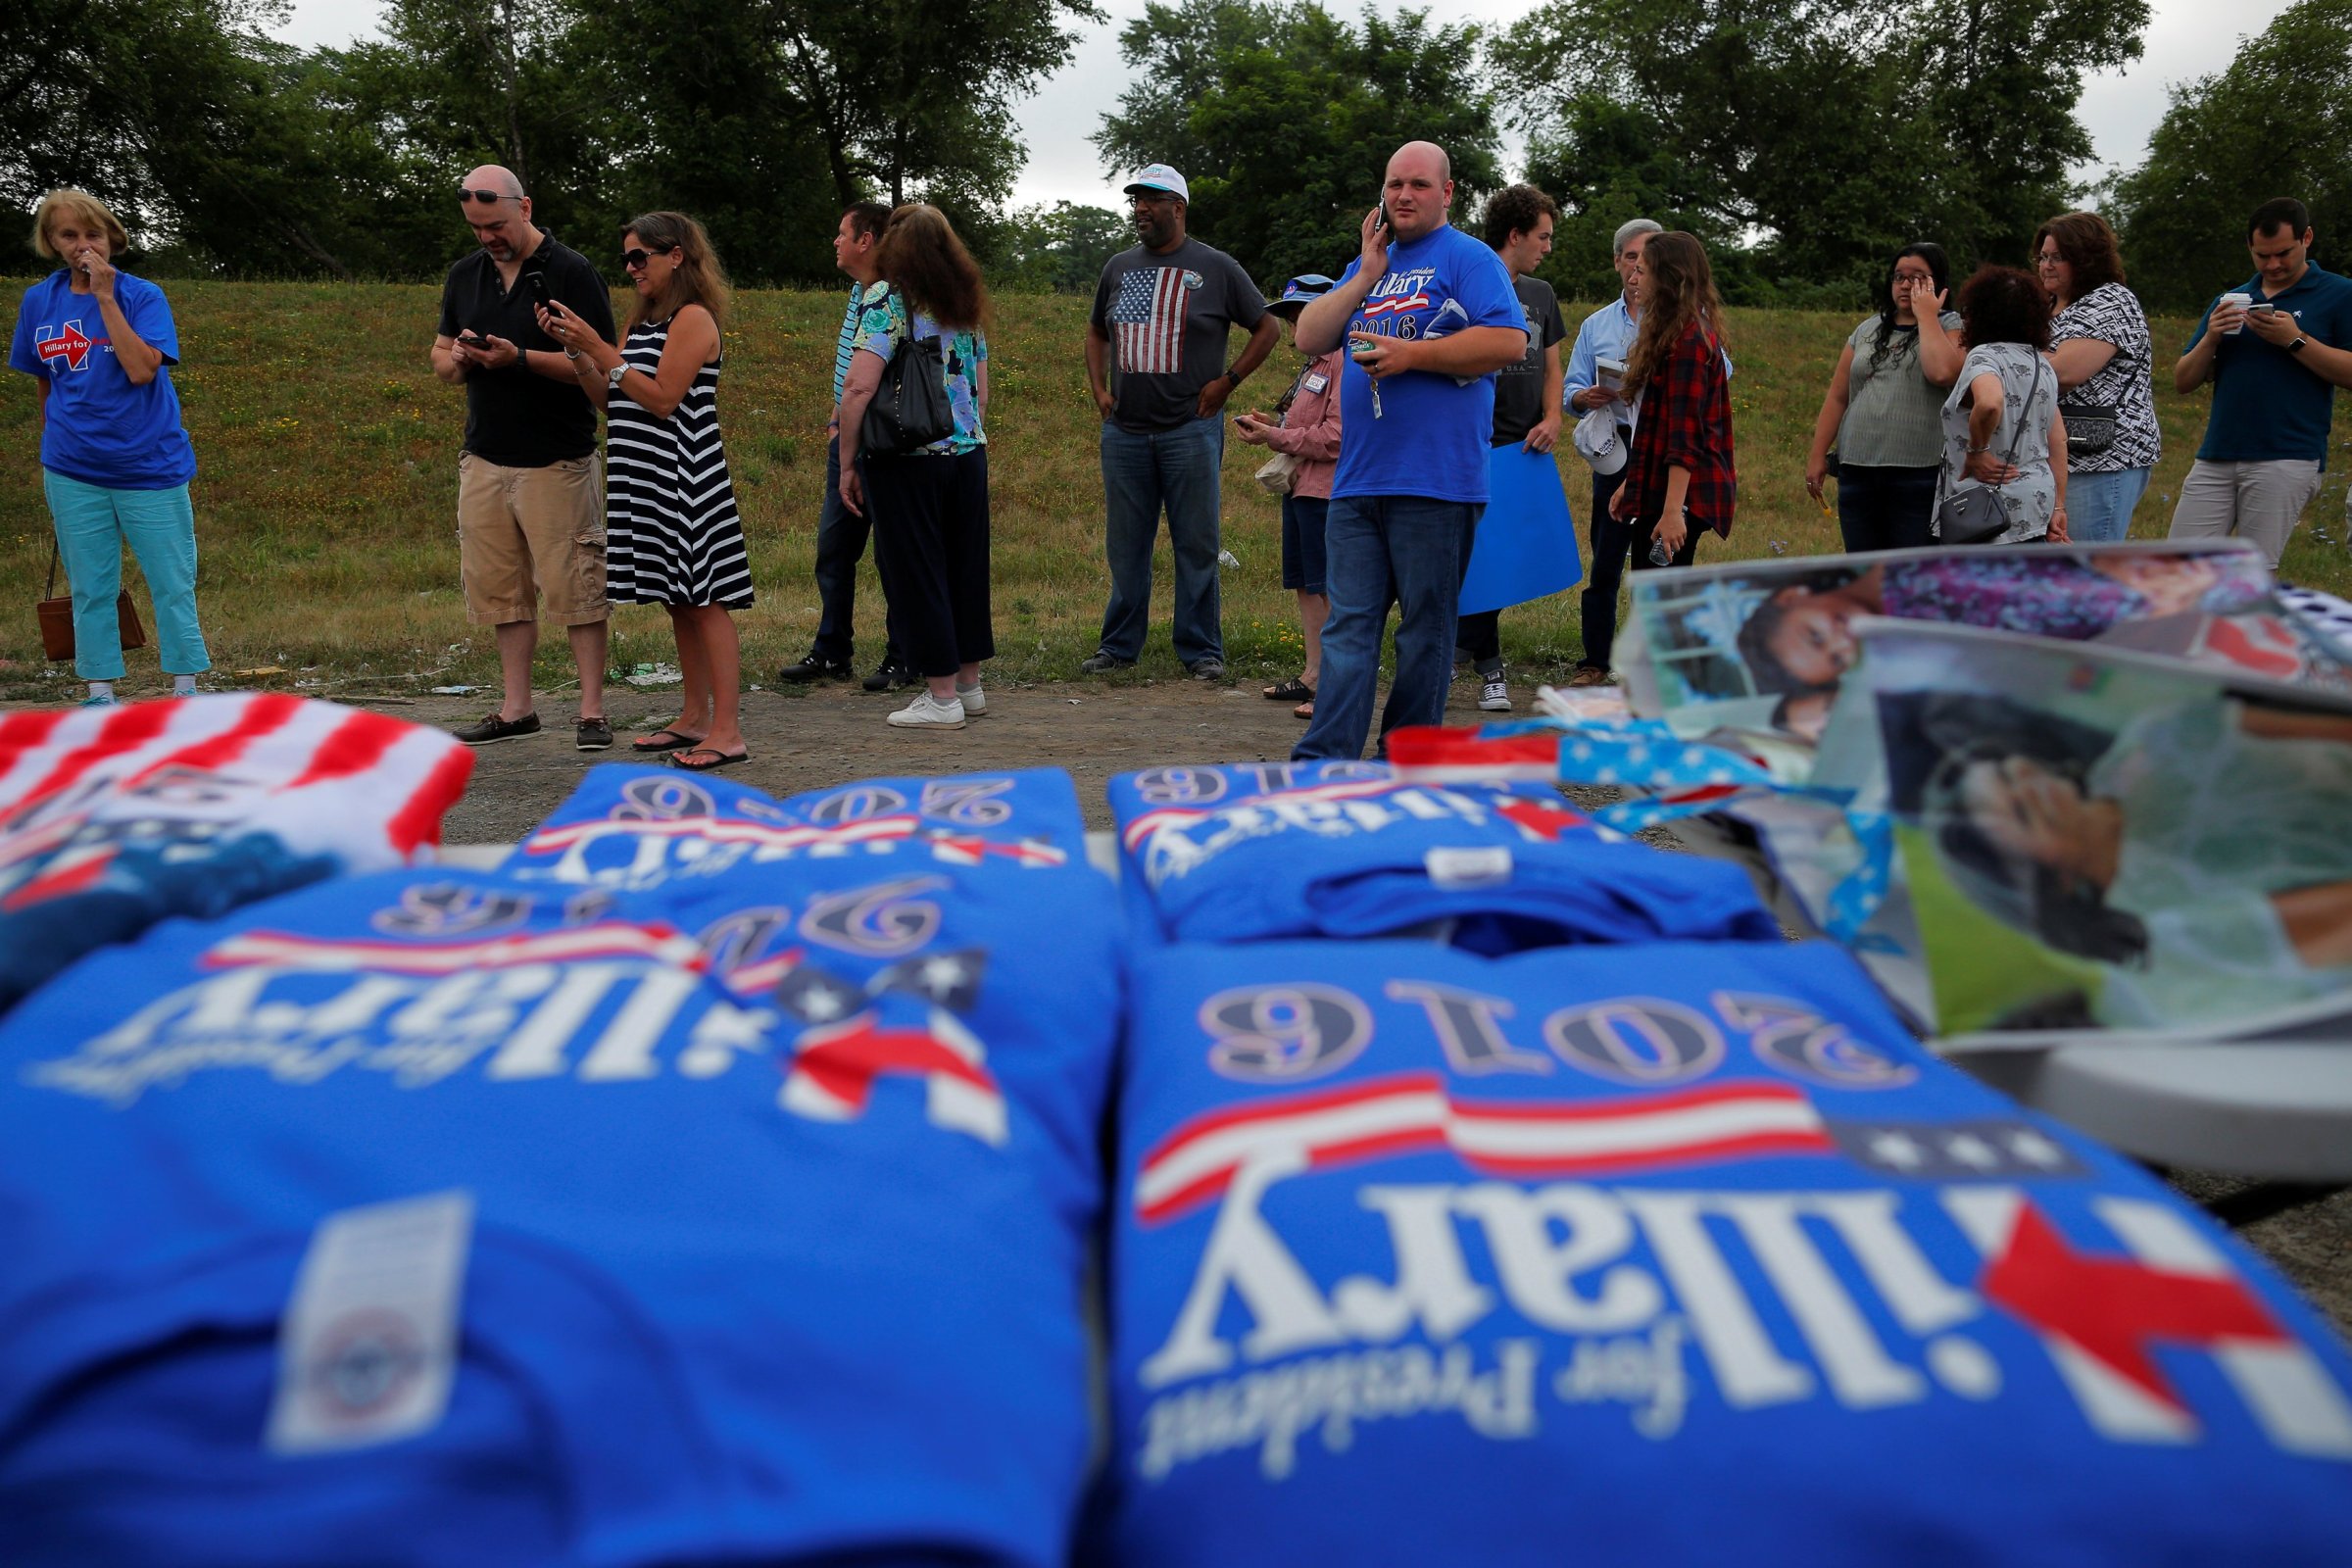 Guests wait in line before a campaign event with U.S. Democratic presidential candidate Hillary Clinton and U.S. Vice President Joe Biden in Scranton, Penns. on July 8, 2016, which was postponed "due to the tragic events in Dallas," according to the campaign.